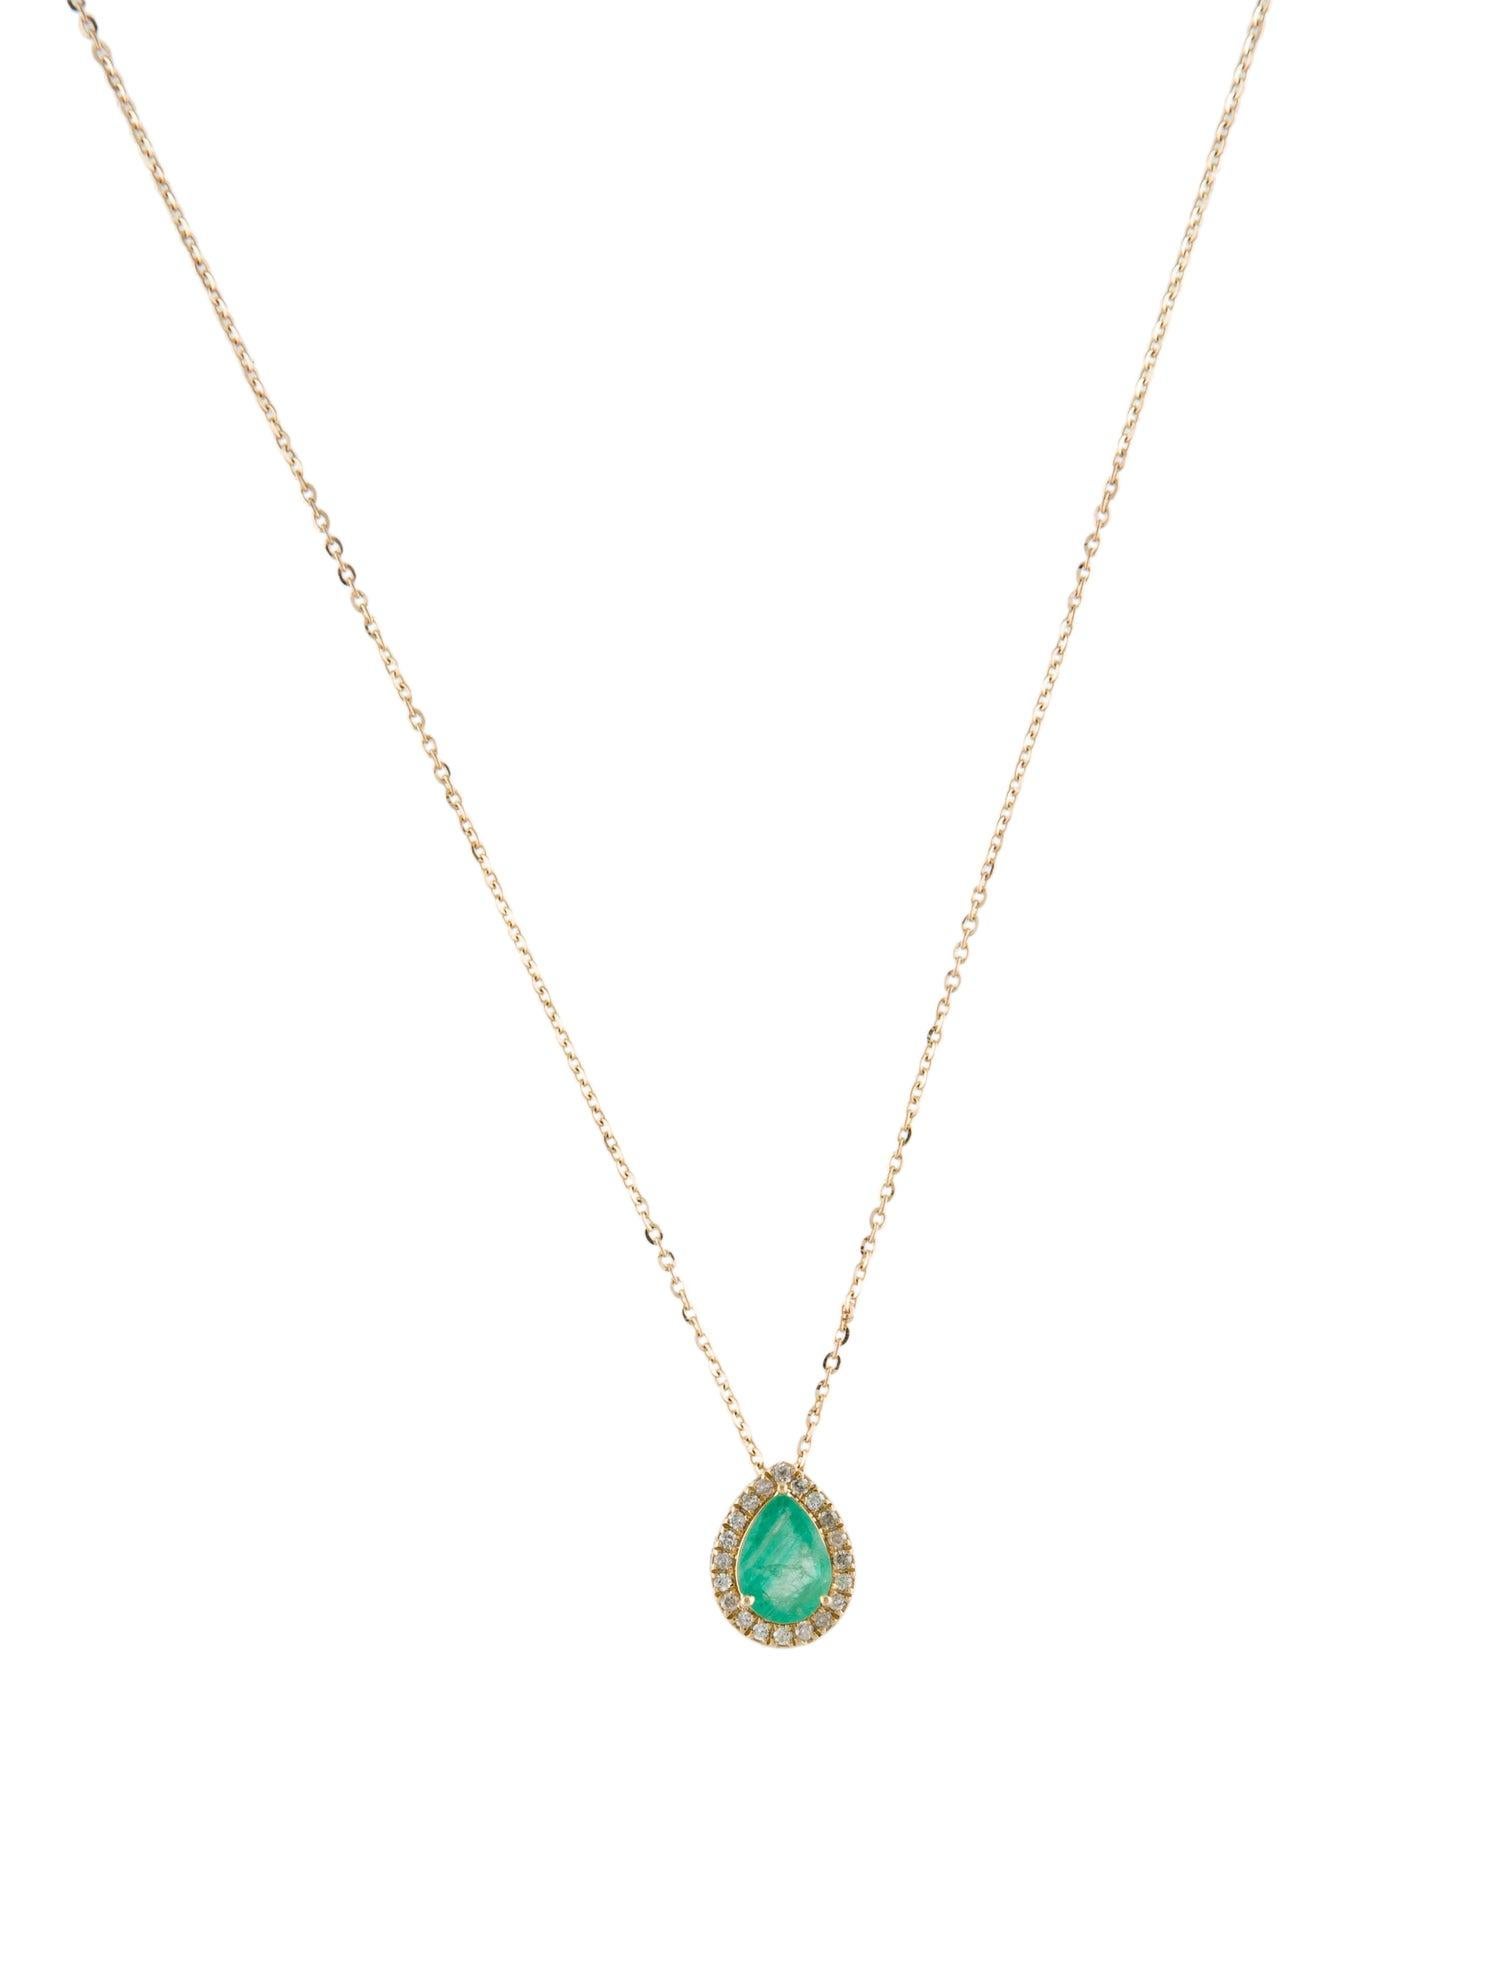 14K Emerald & Diamond Pendant Necklace - Exquisite Jewelry for Timeless Elegance In New Condition For Sale In Holtsville, NY